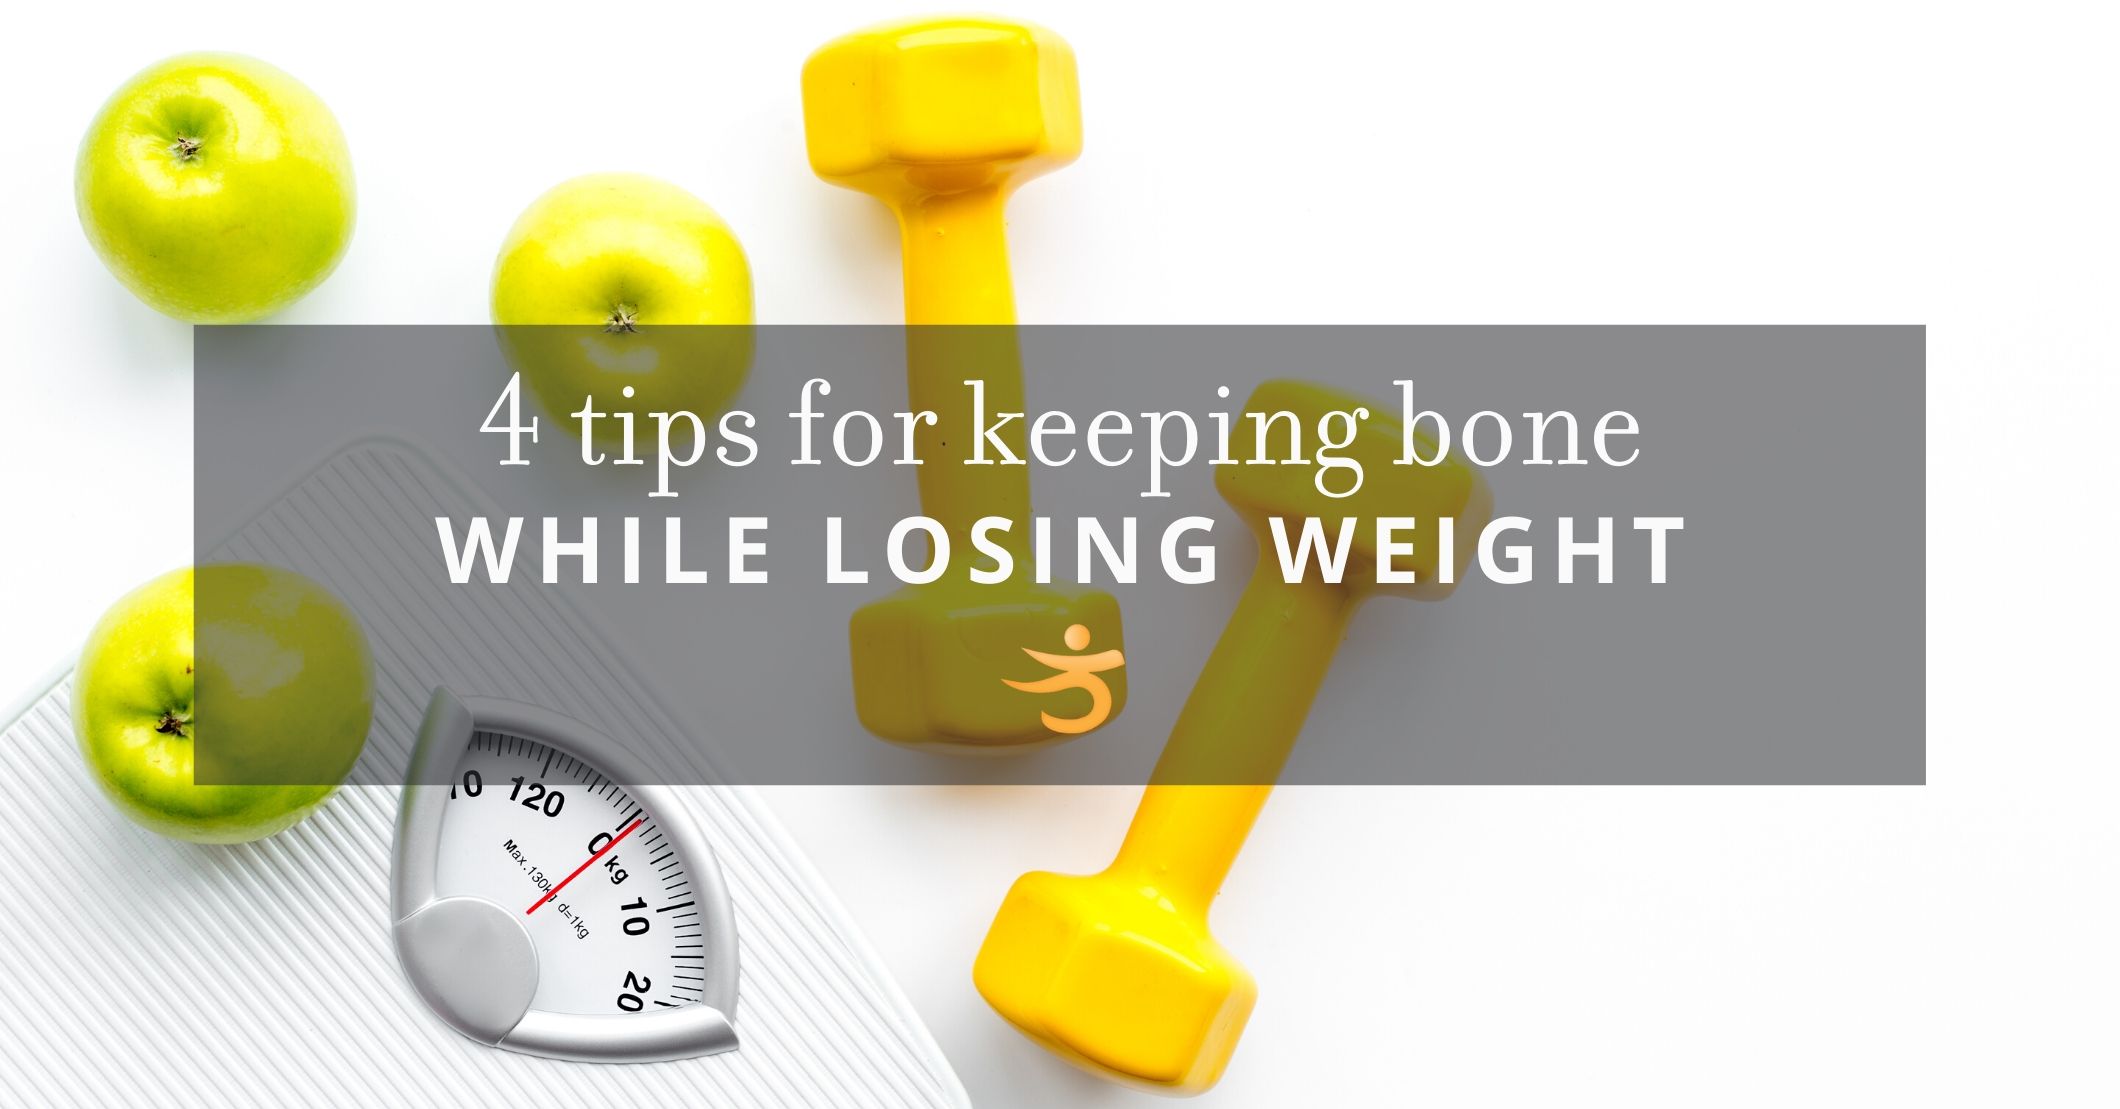 Tips For Keeping Bone While Losing Weight— Better Bones